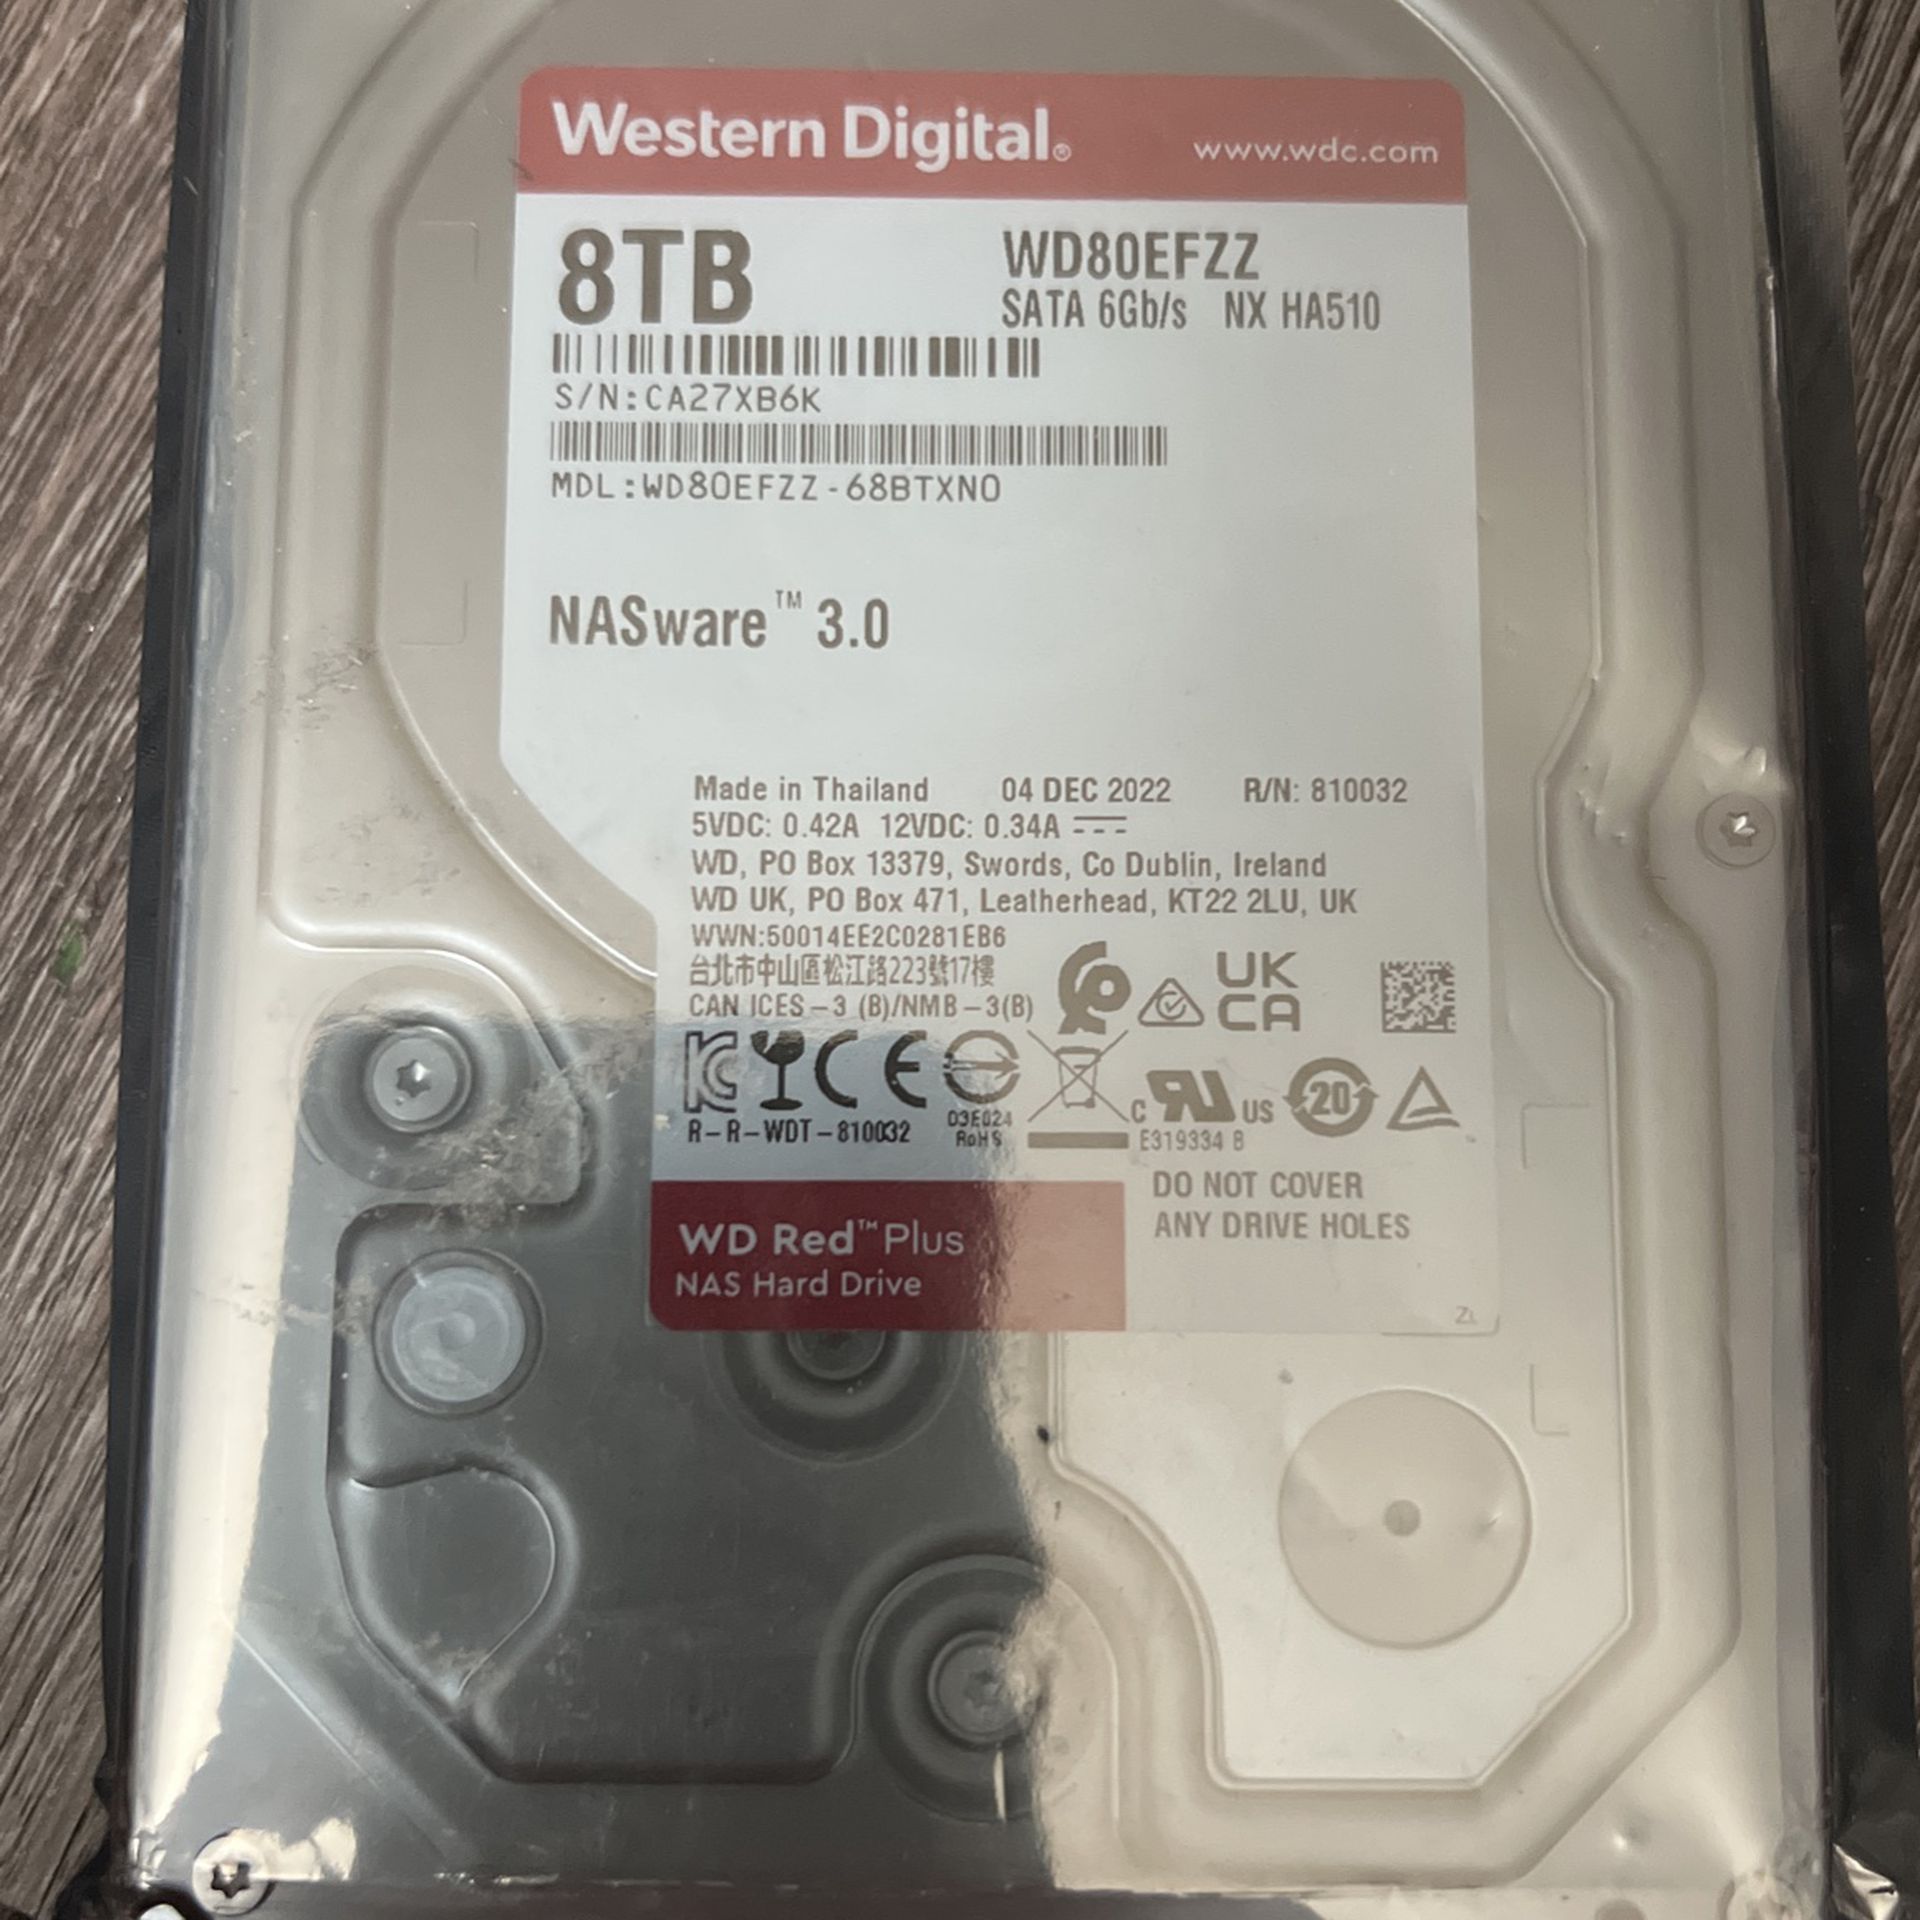 WD Red Hard Disk Drive - 5400 RPM Class SATA 6 Gb/s 128MB Cache 3.5 Inch - WD80EFZX for Sale in Las Vegas, NV - OfferUp